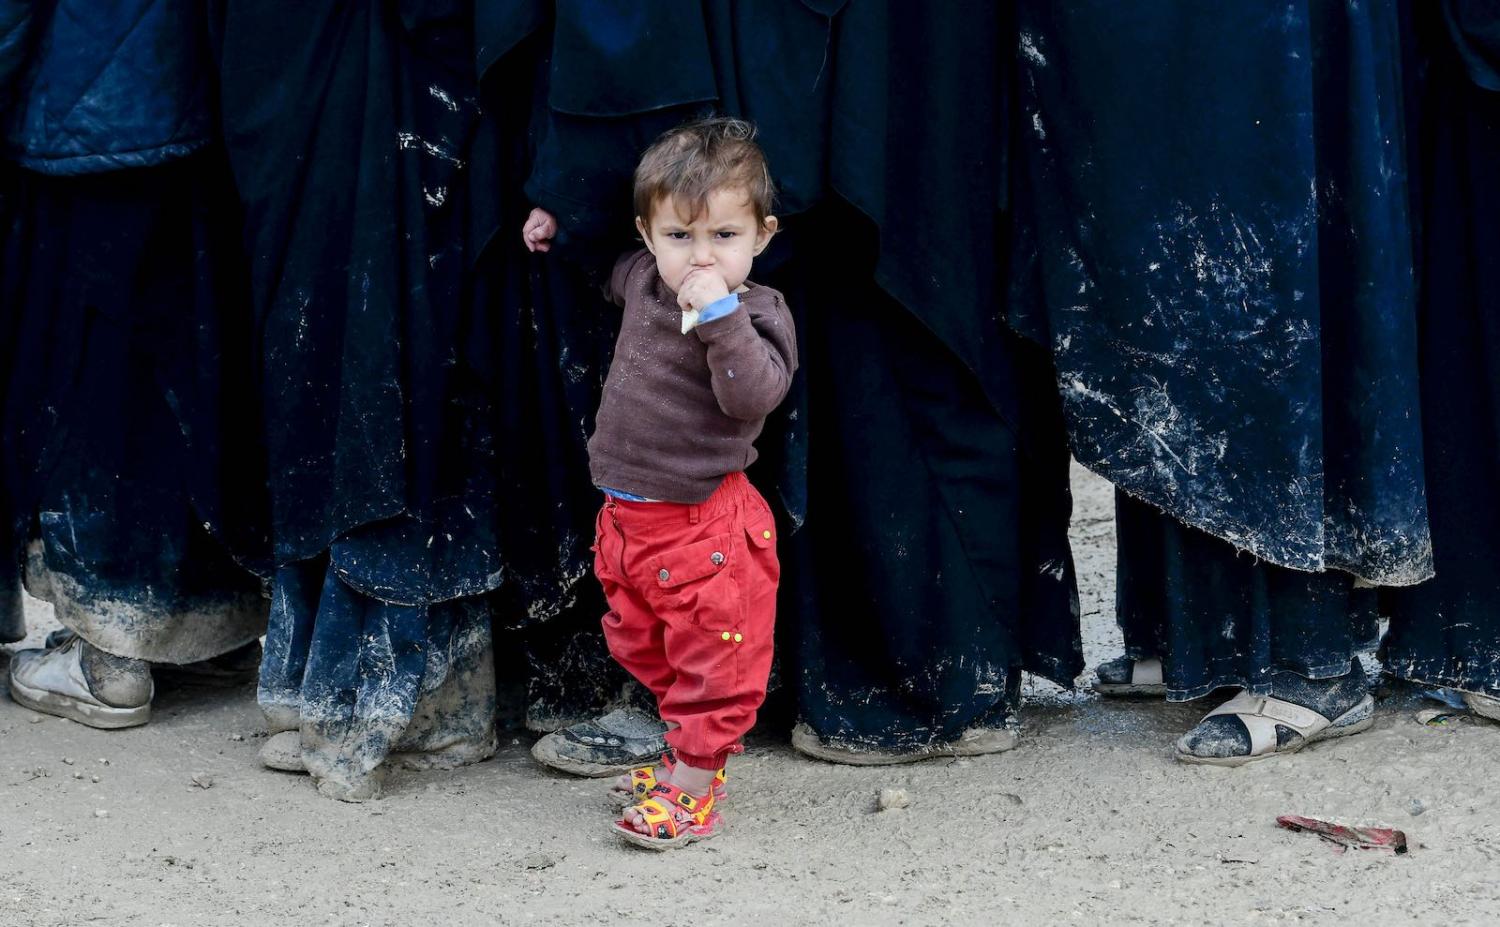 A child stands in queue in al-Hol camp, housing relatives of ISIS members, northeastern Syria (Photo: Giuseppe Cacace via Getty)